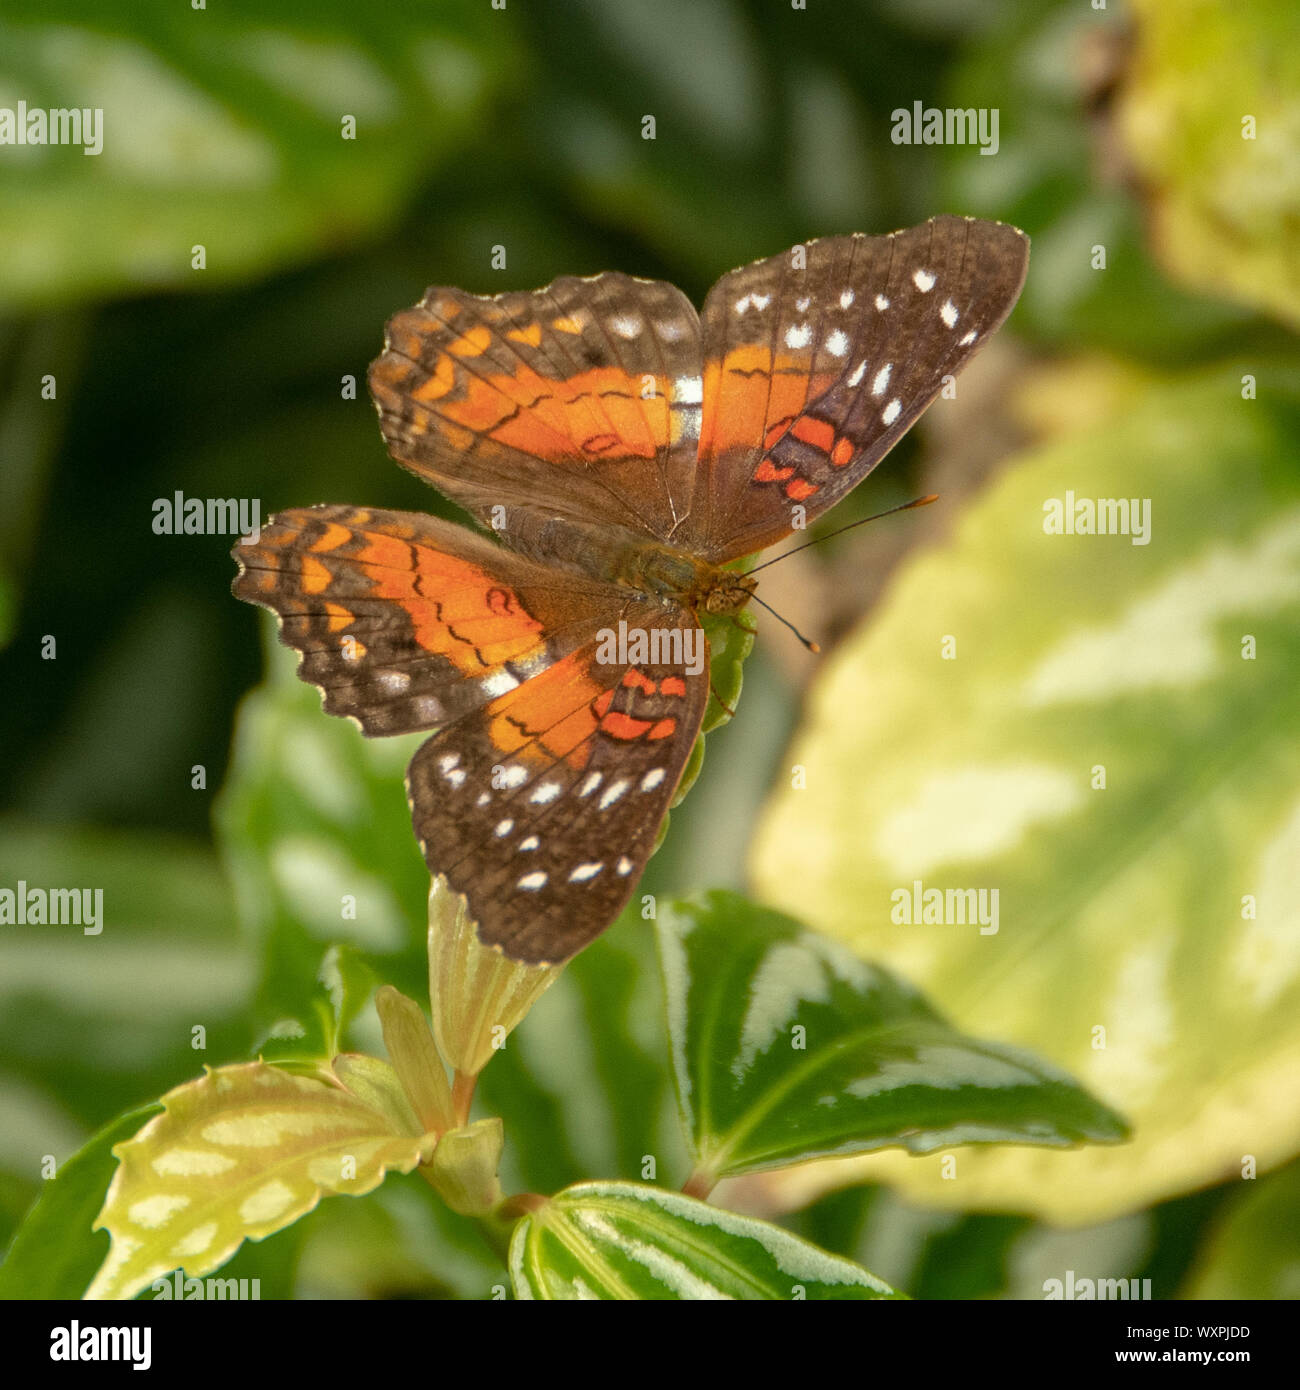 Butterfly on a plant, Canada Stock Photo